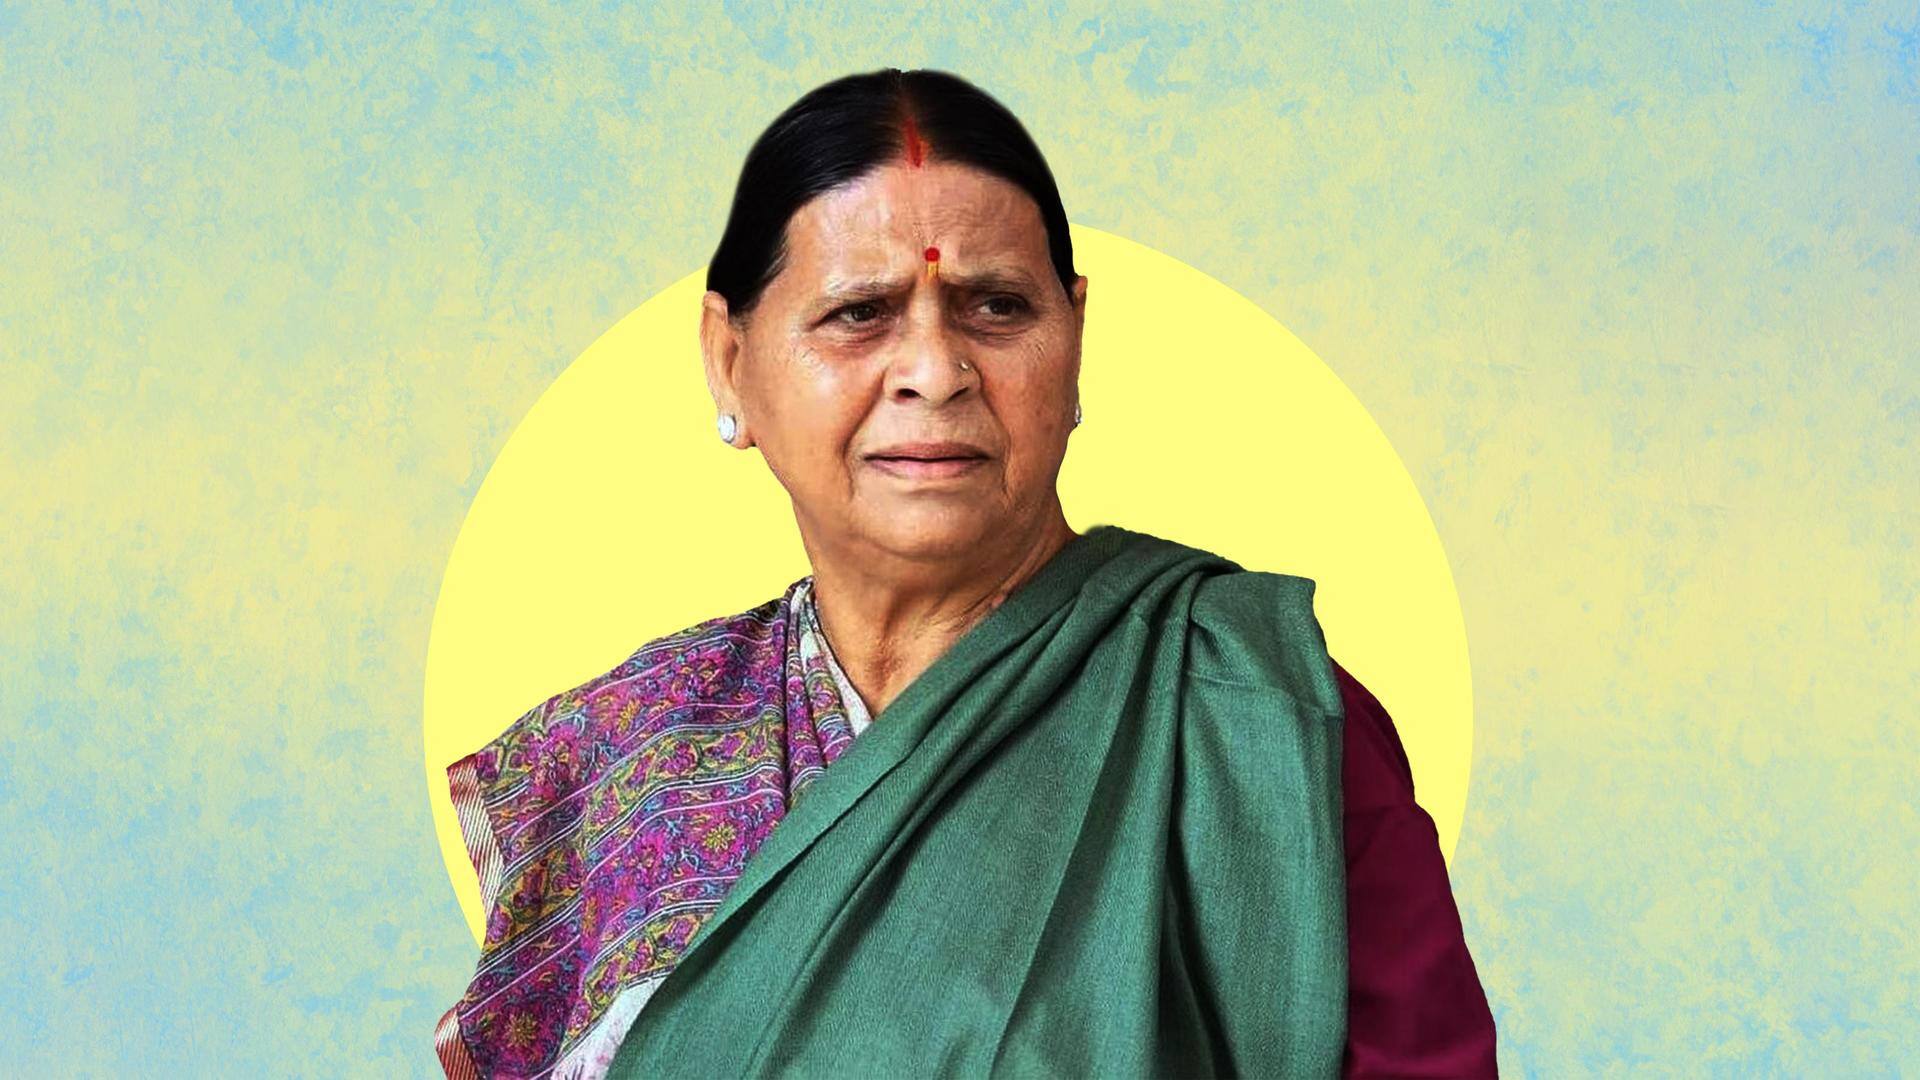 Land-for-jobs scam: ED questions Rabri Devi for 2.5 hours